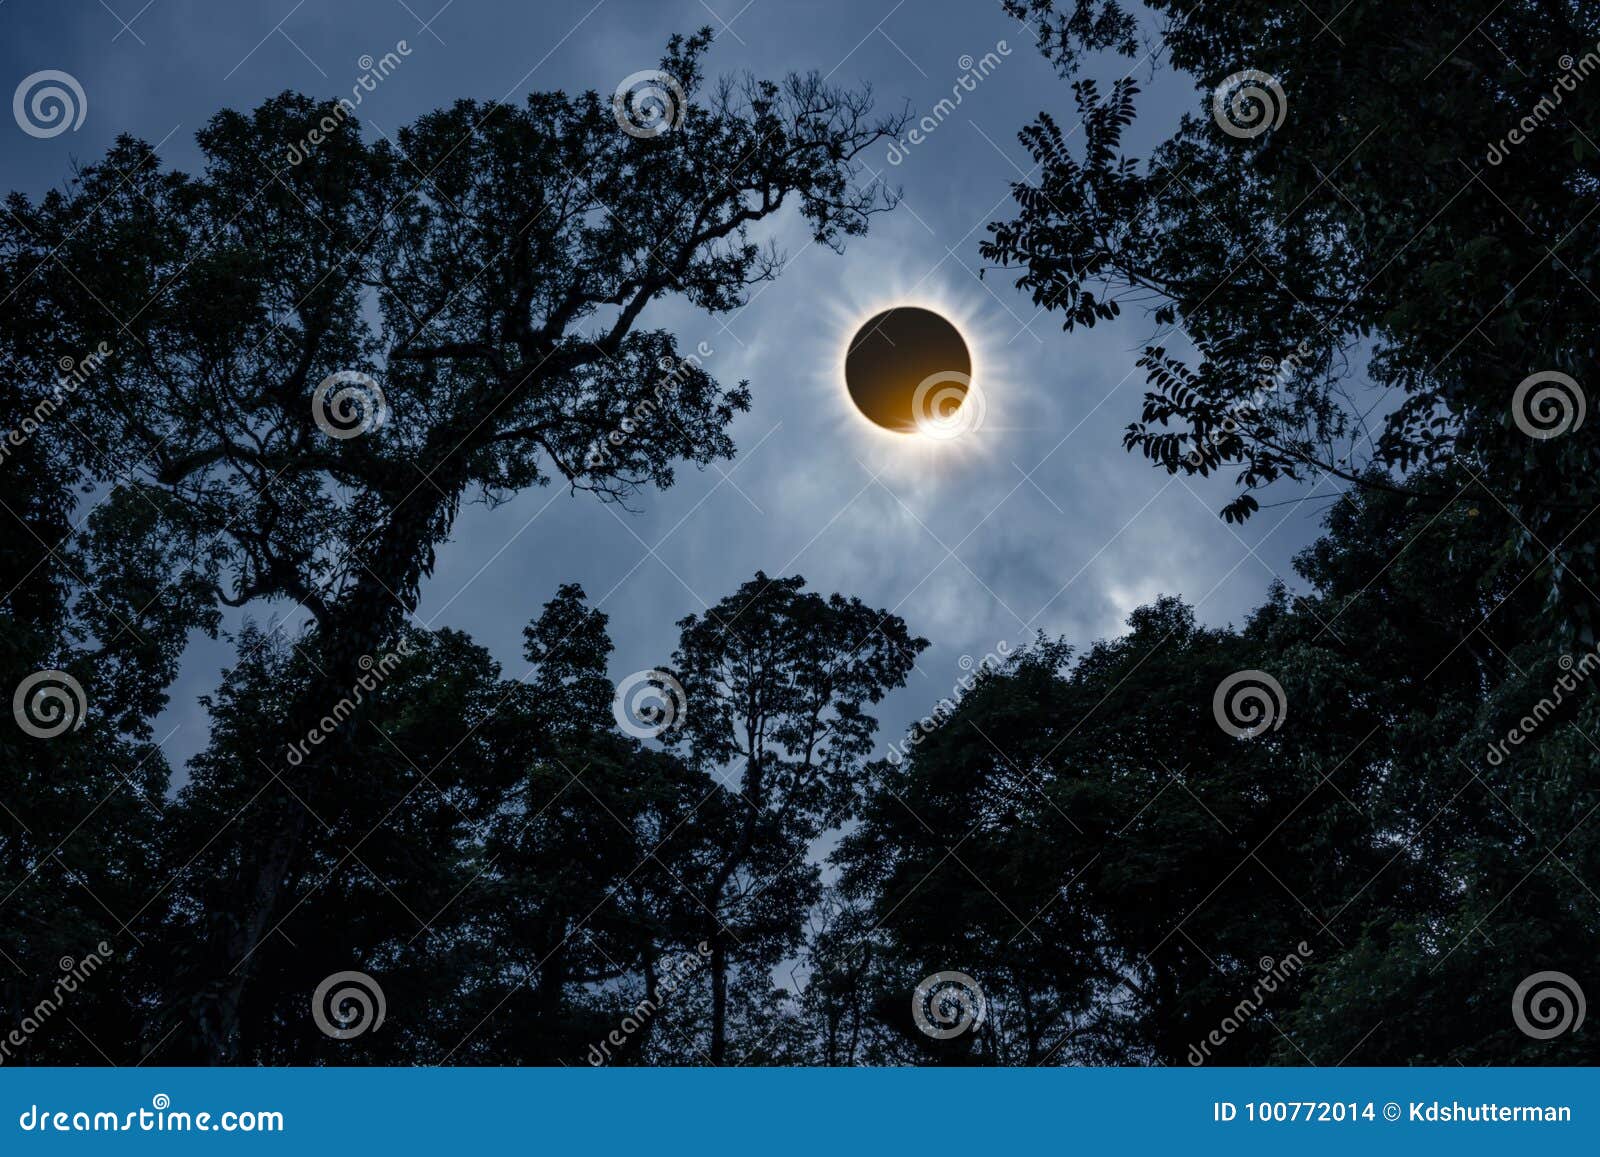 Ring of fire” eclipse this weekend will send US solar power plunging